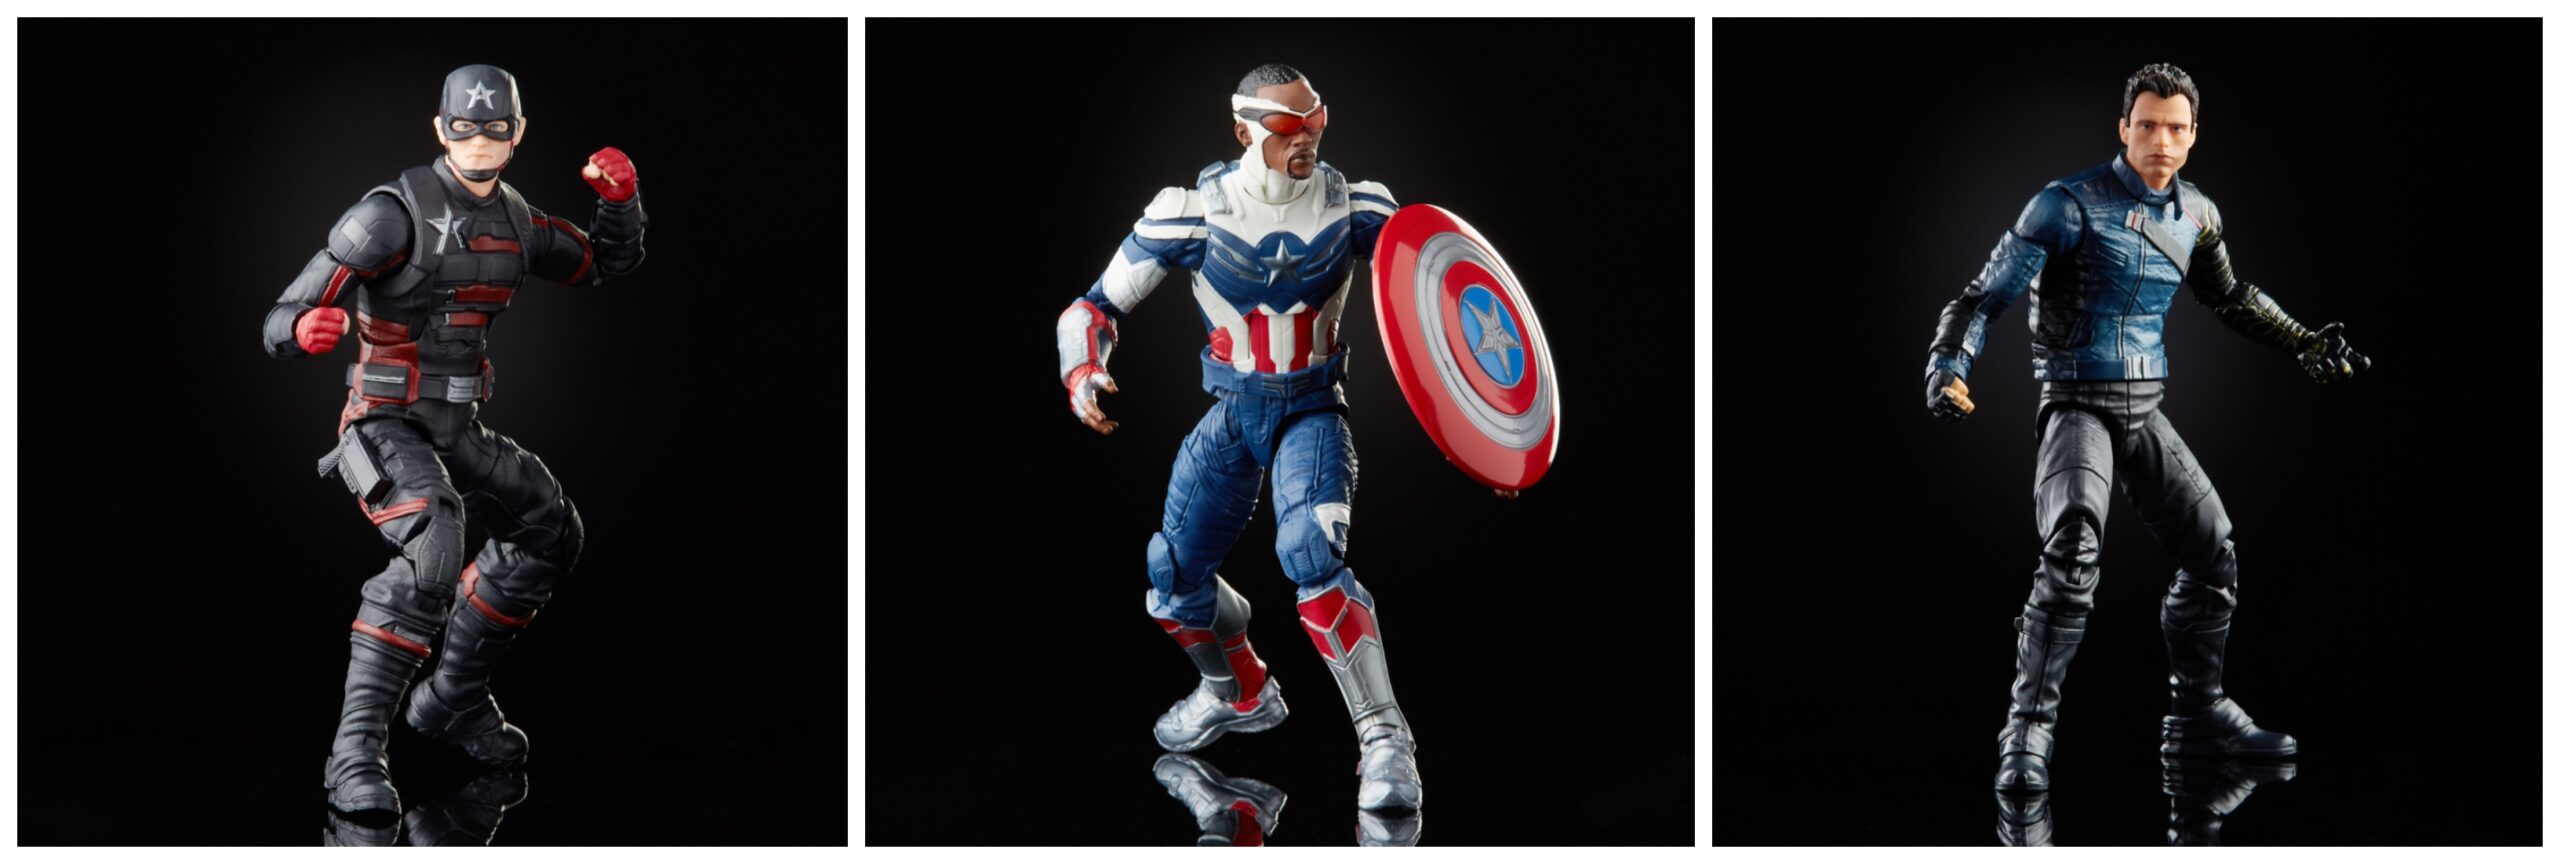 Check out the New Marvel Merch Inspired by 'The Falcon and the Winter Soldier'